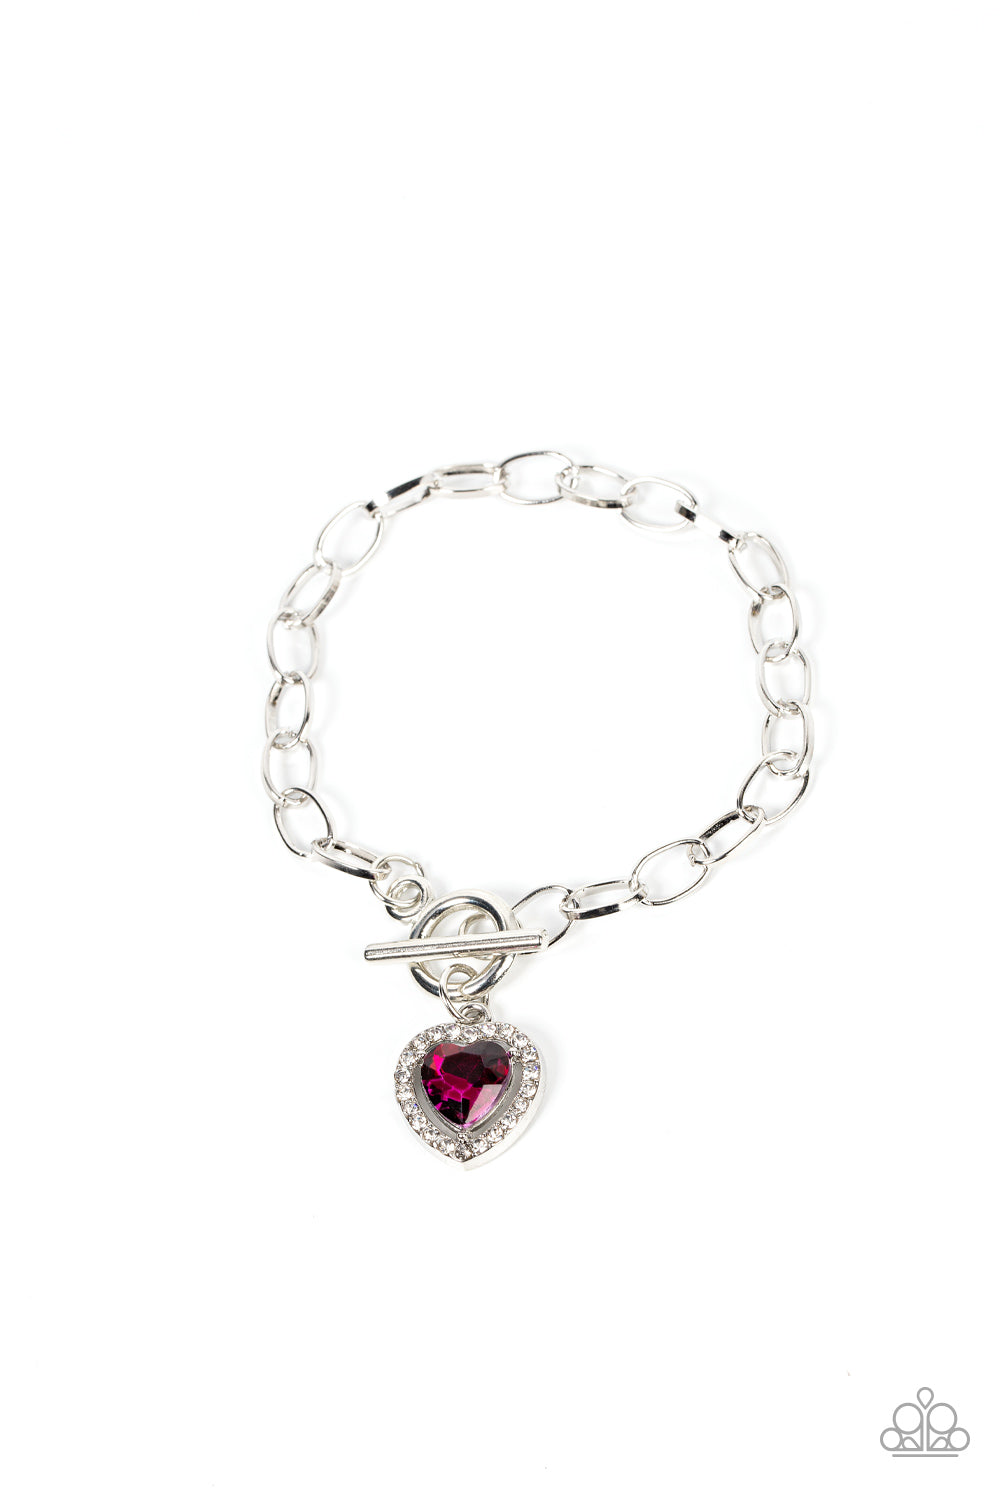 Paparazzi Till DAZZLE Do Us Part - Pink Bracelet - A Finishing Touch Jewelry